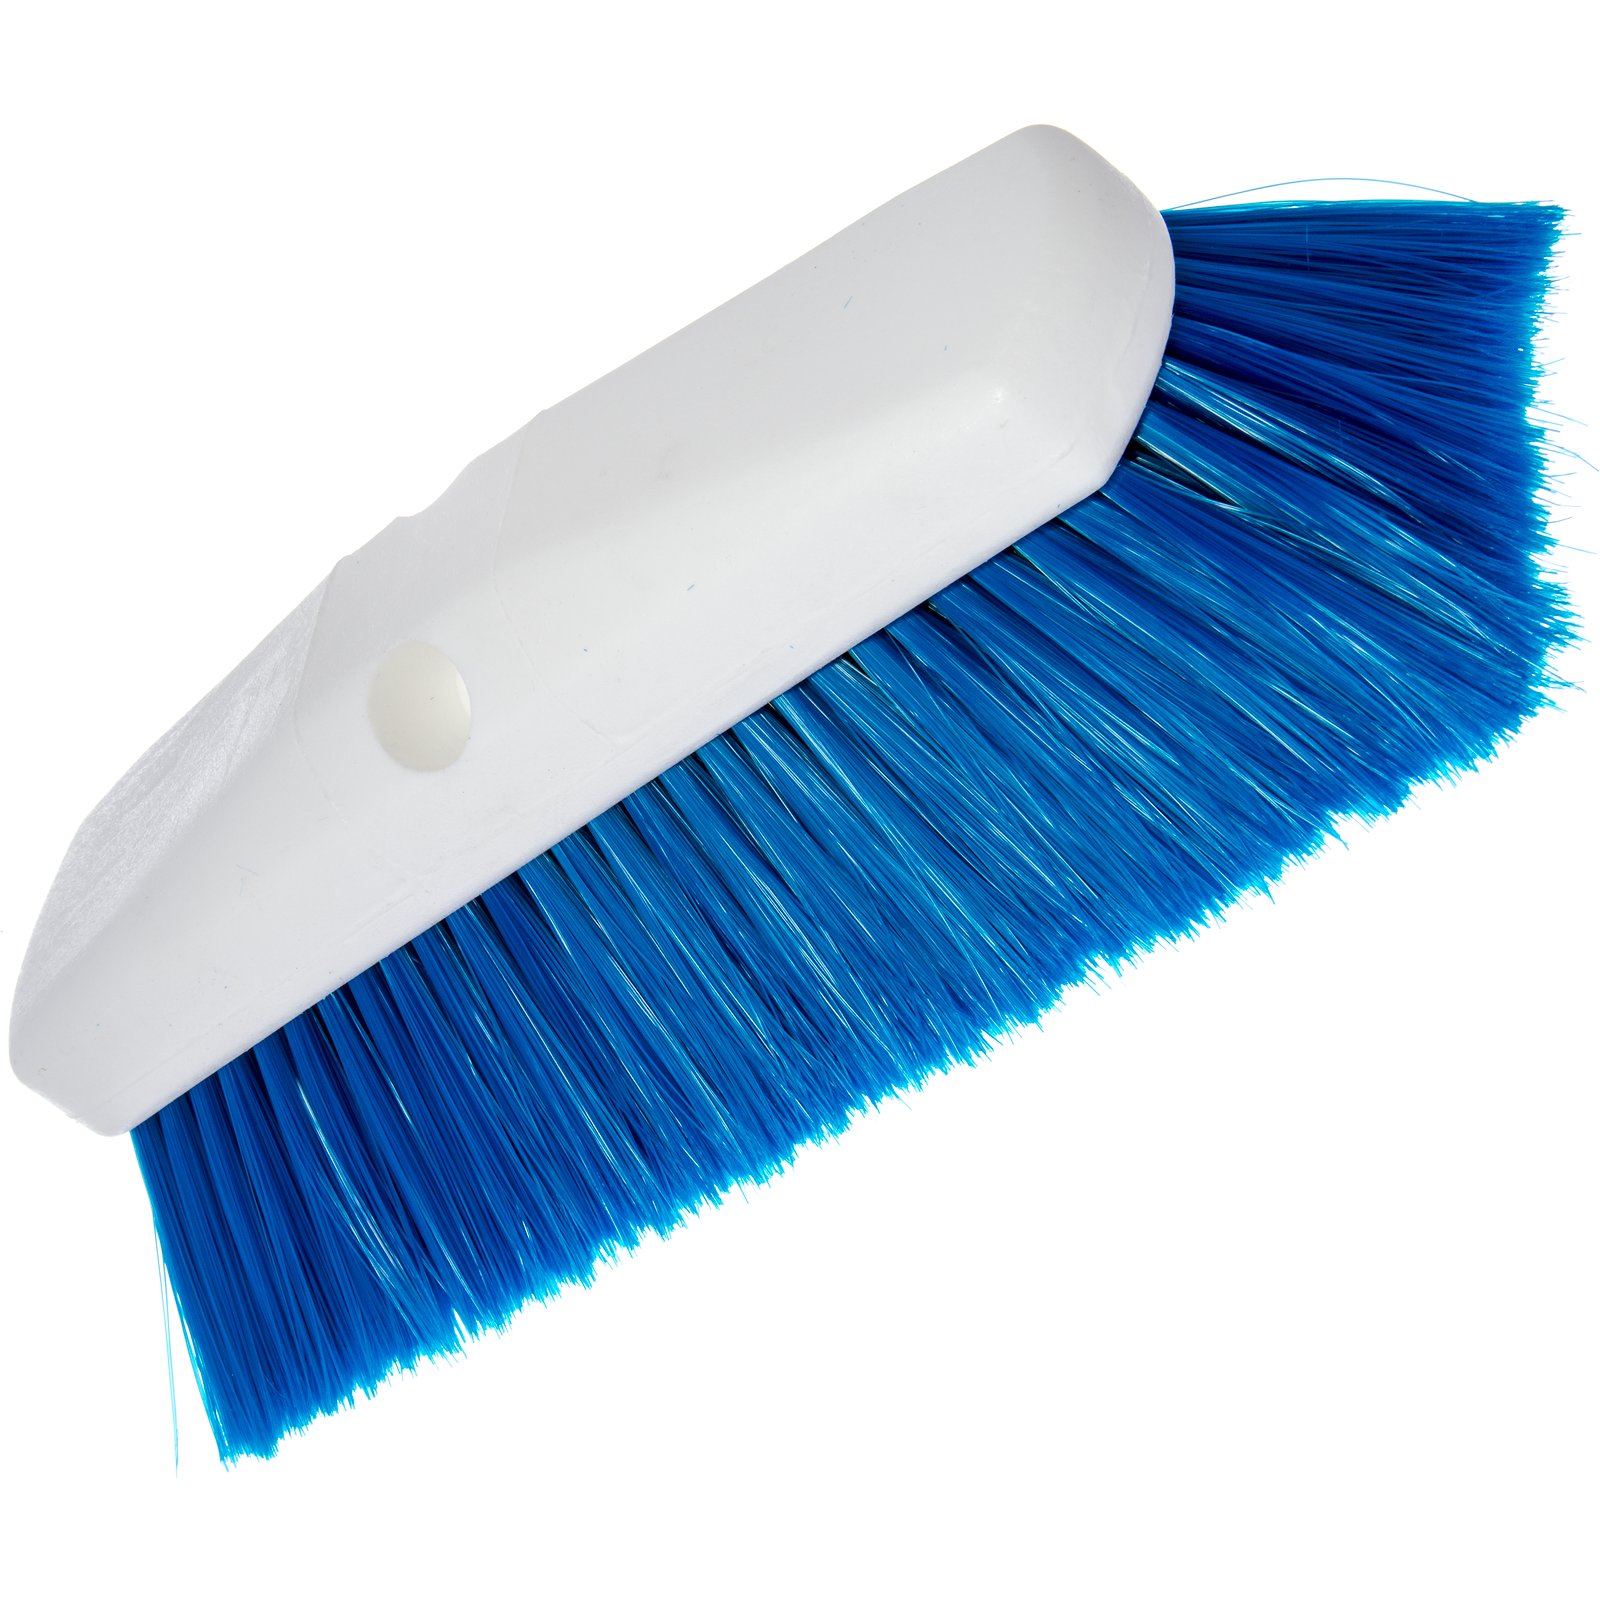 BRUSH WALL AND EQUIPMENT BLUE
10&quot;